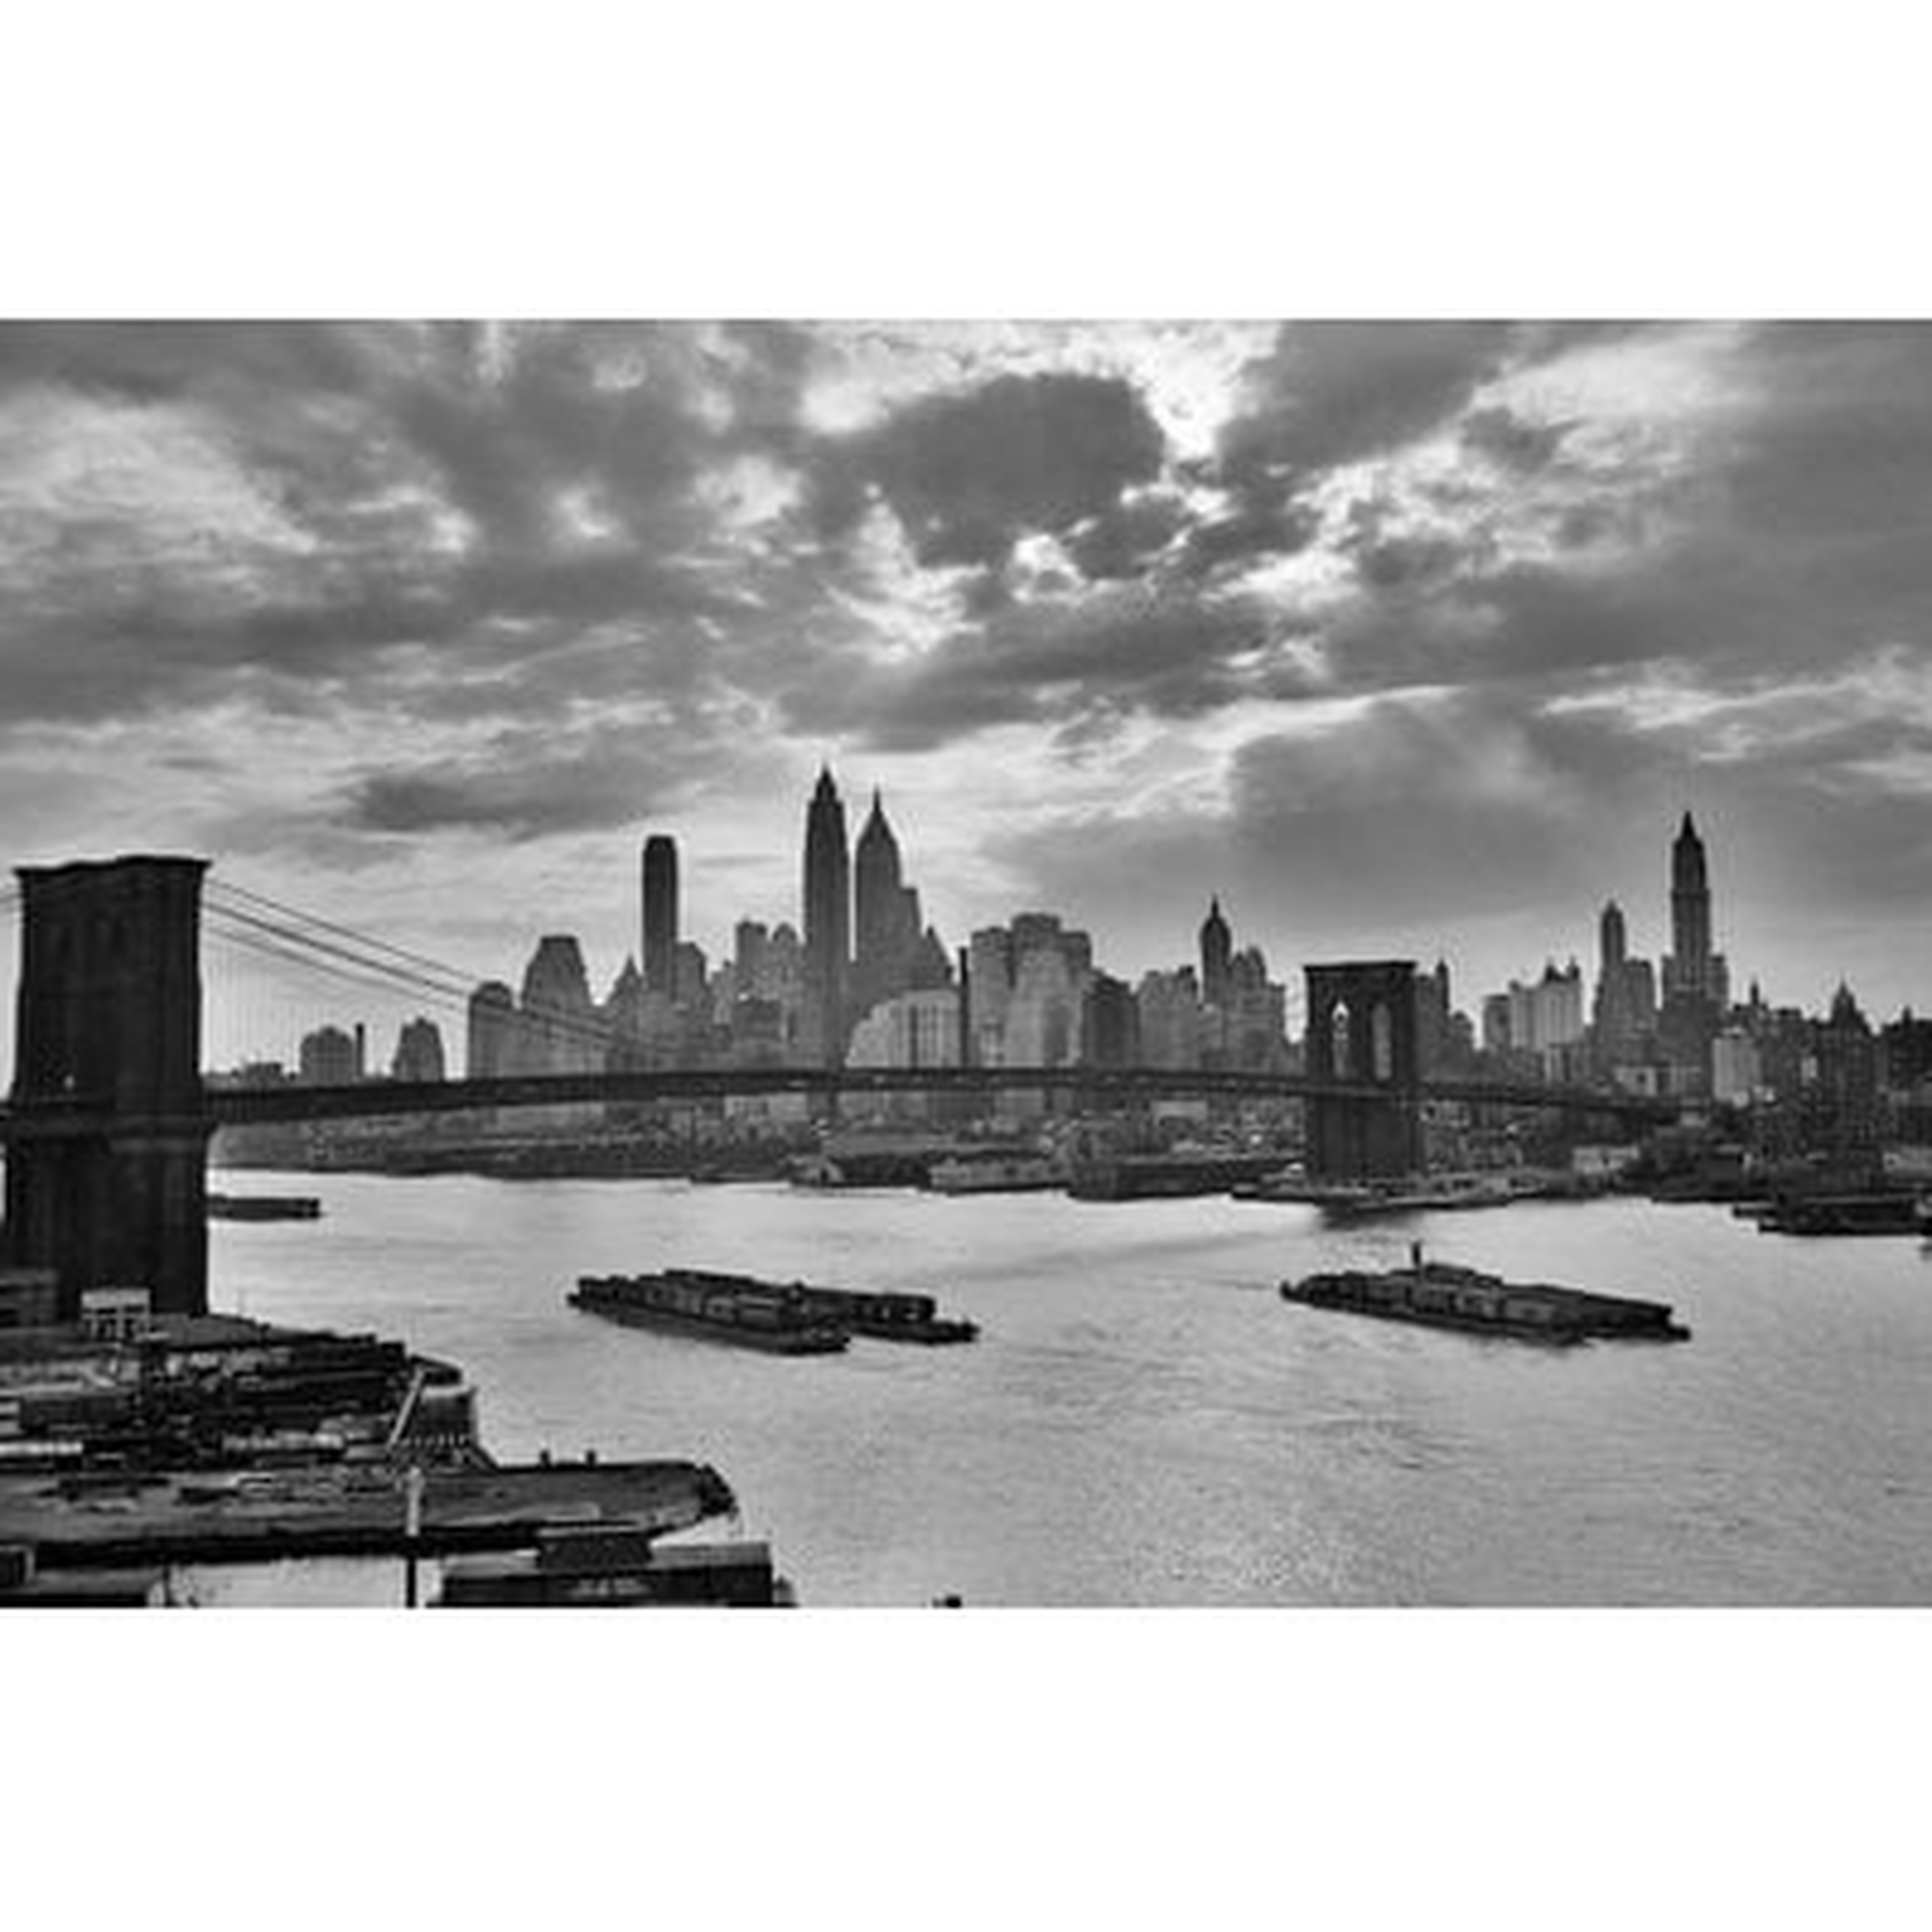 '1940s-1950s Dramatic Sunset Downtown New York City Skyline with Brooklyn Bridge Barges in East River Nyc, NY, USA' Photographic Print on Wrapped Canvas - Wayfair